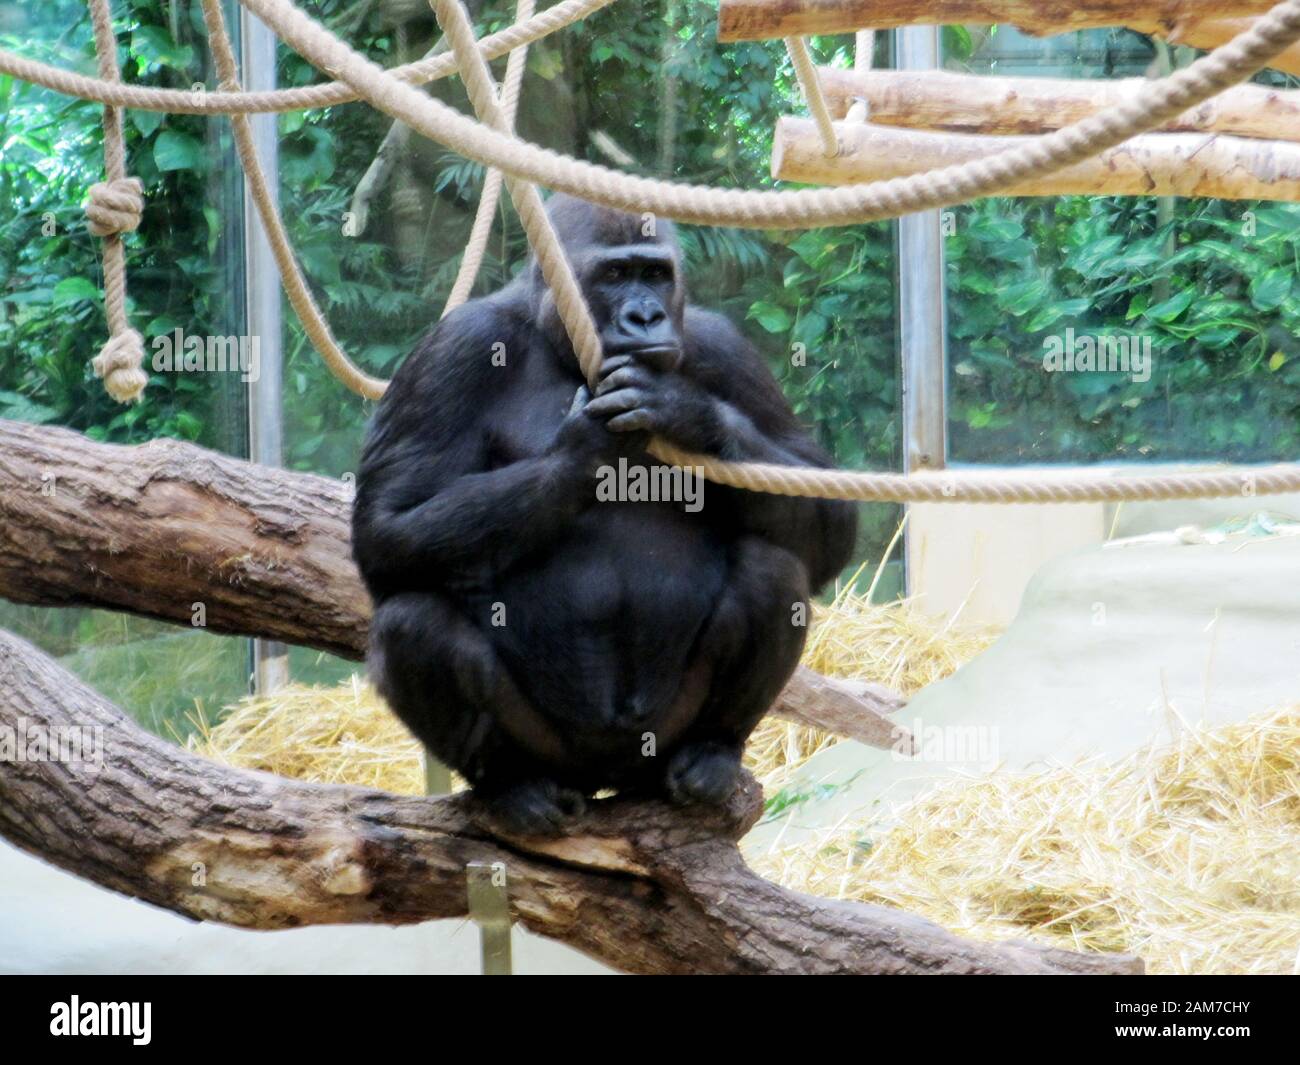 View of a western lowland gorilla from the primates family of the great apes, Hominidae Stock Photo